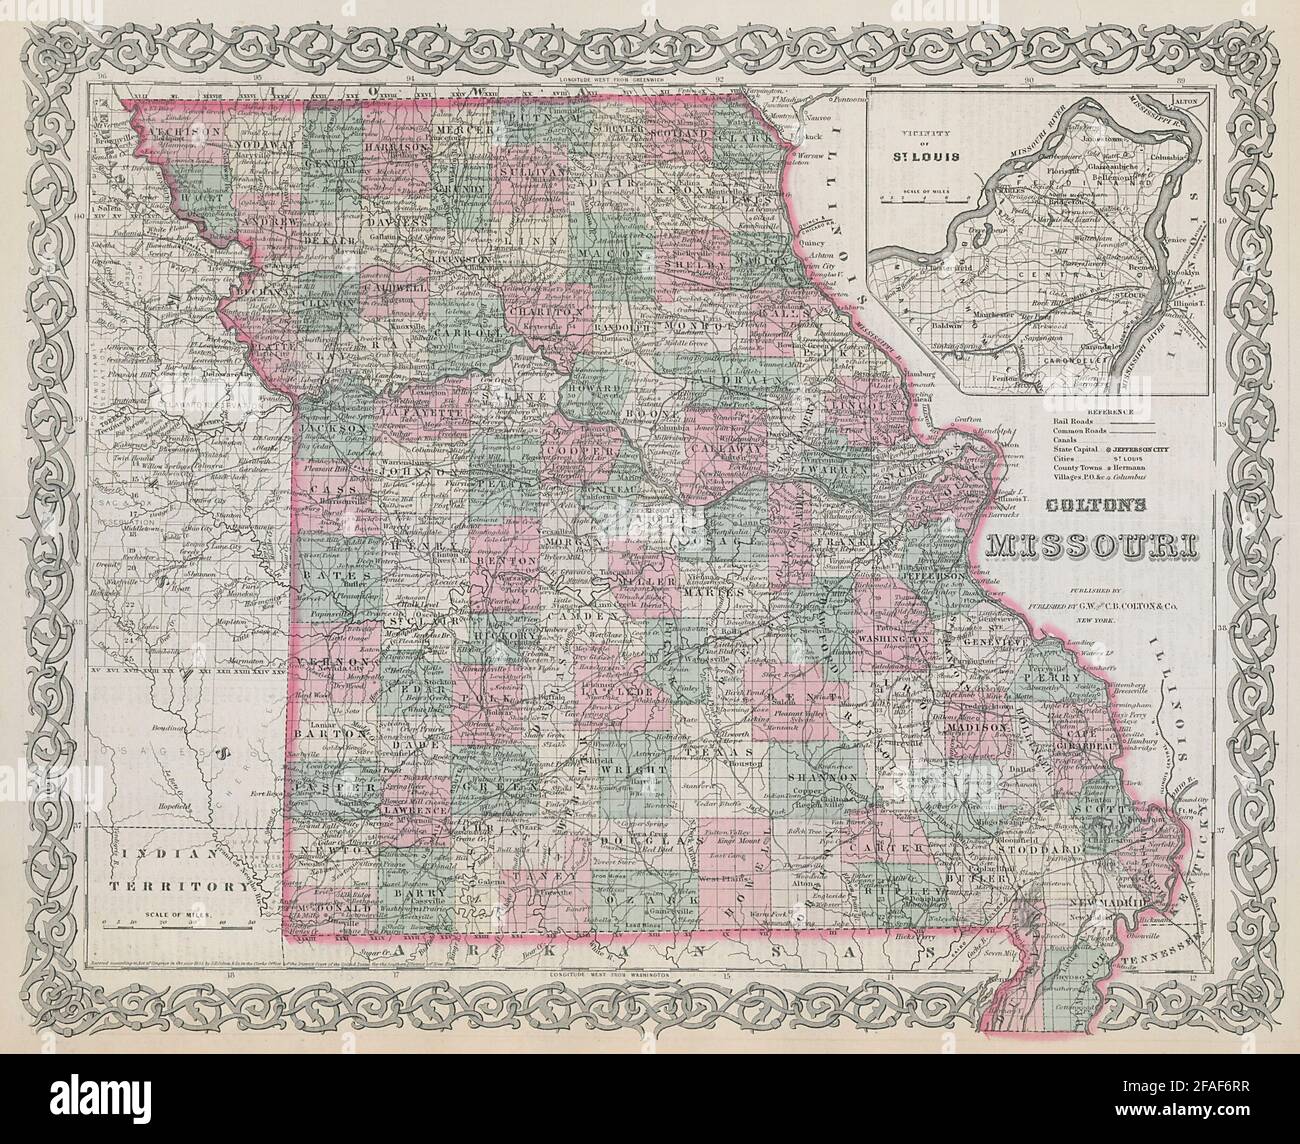 Colton's Missouri. Decorative antique US state map 1869 old chart Stock Photo